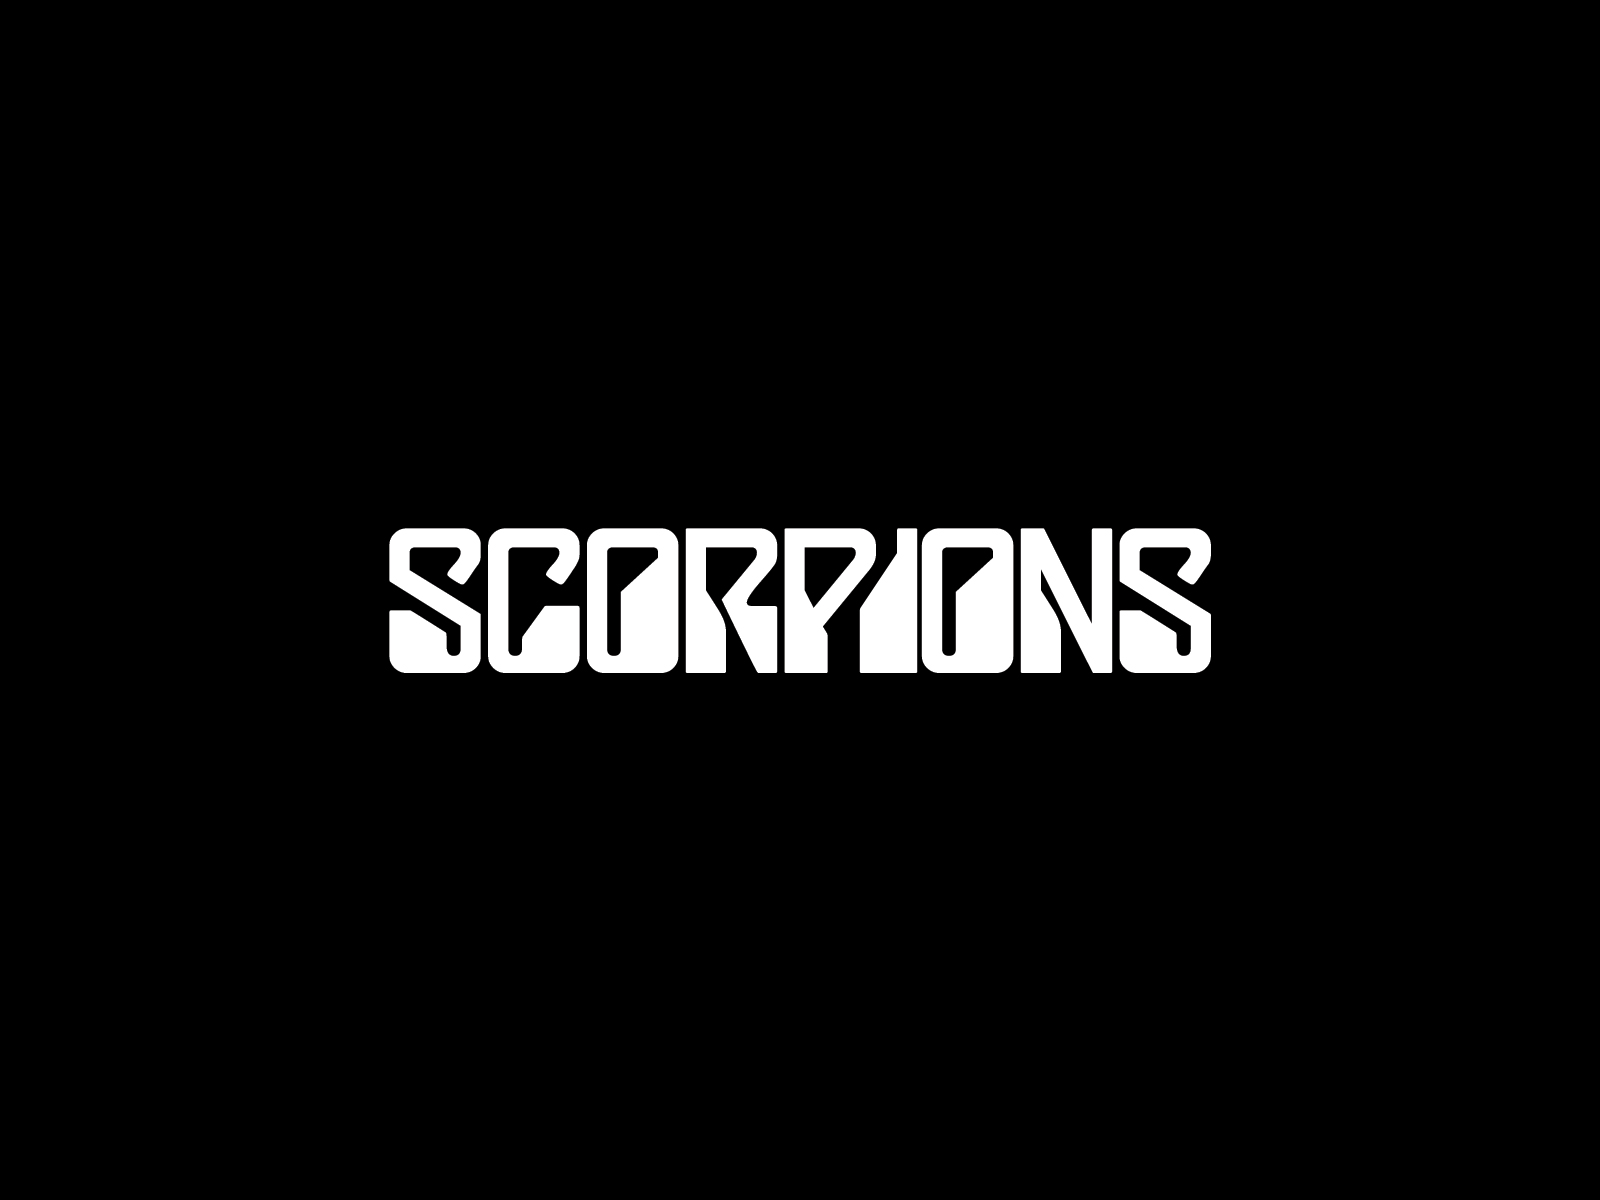 11 Scorpions HD Wallpapers Backgrounds - Wallpaper Abyss